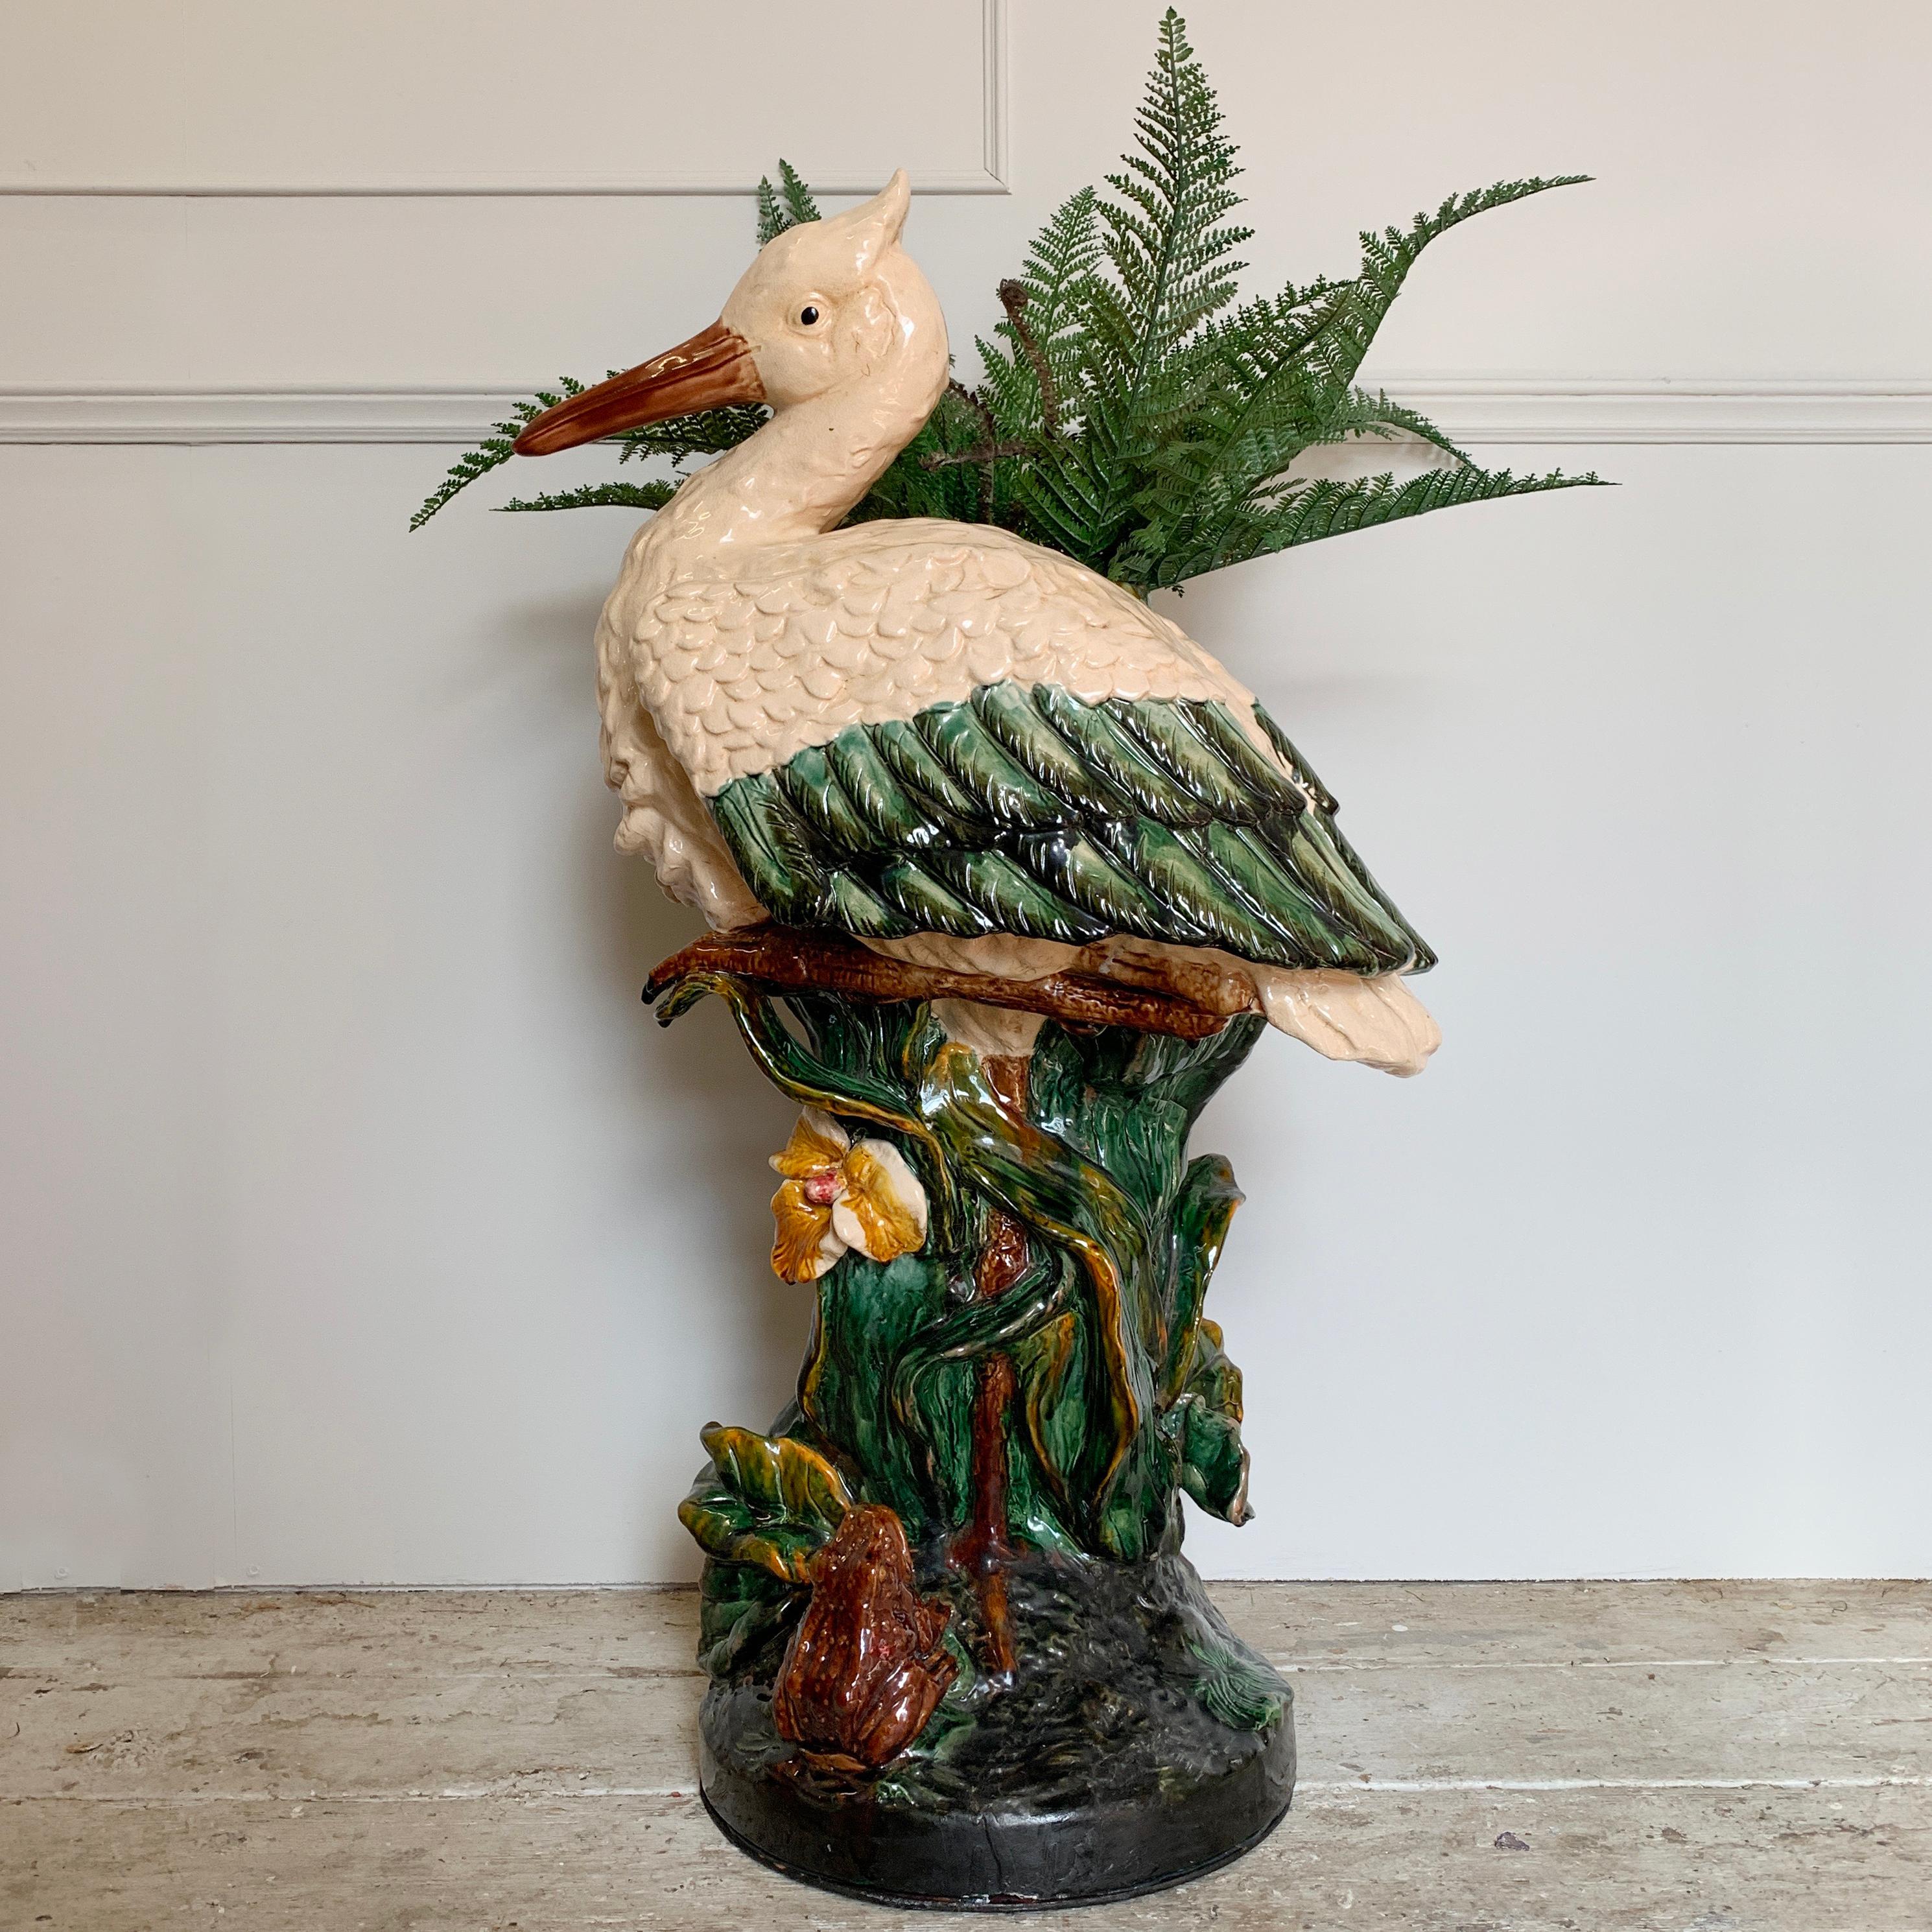 Early 20th century, Majolica stork umbrella stand/jardinière, Joseph Holdcroft/Minton style. This large impressive umbrella stand features a stork with leaf tendrils and flowers around the stem, a small frog sits looking up at the stork. 91cm